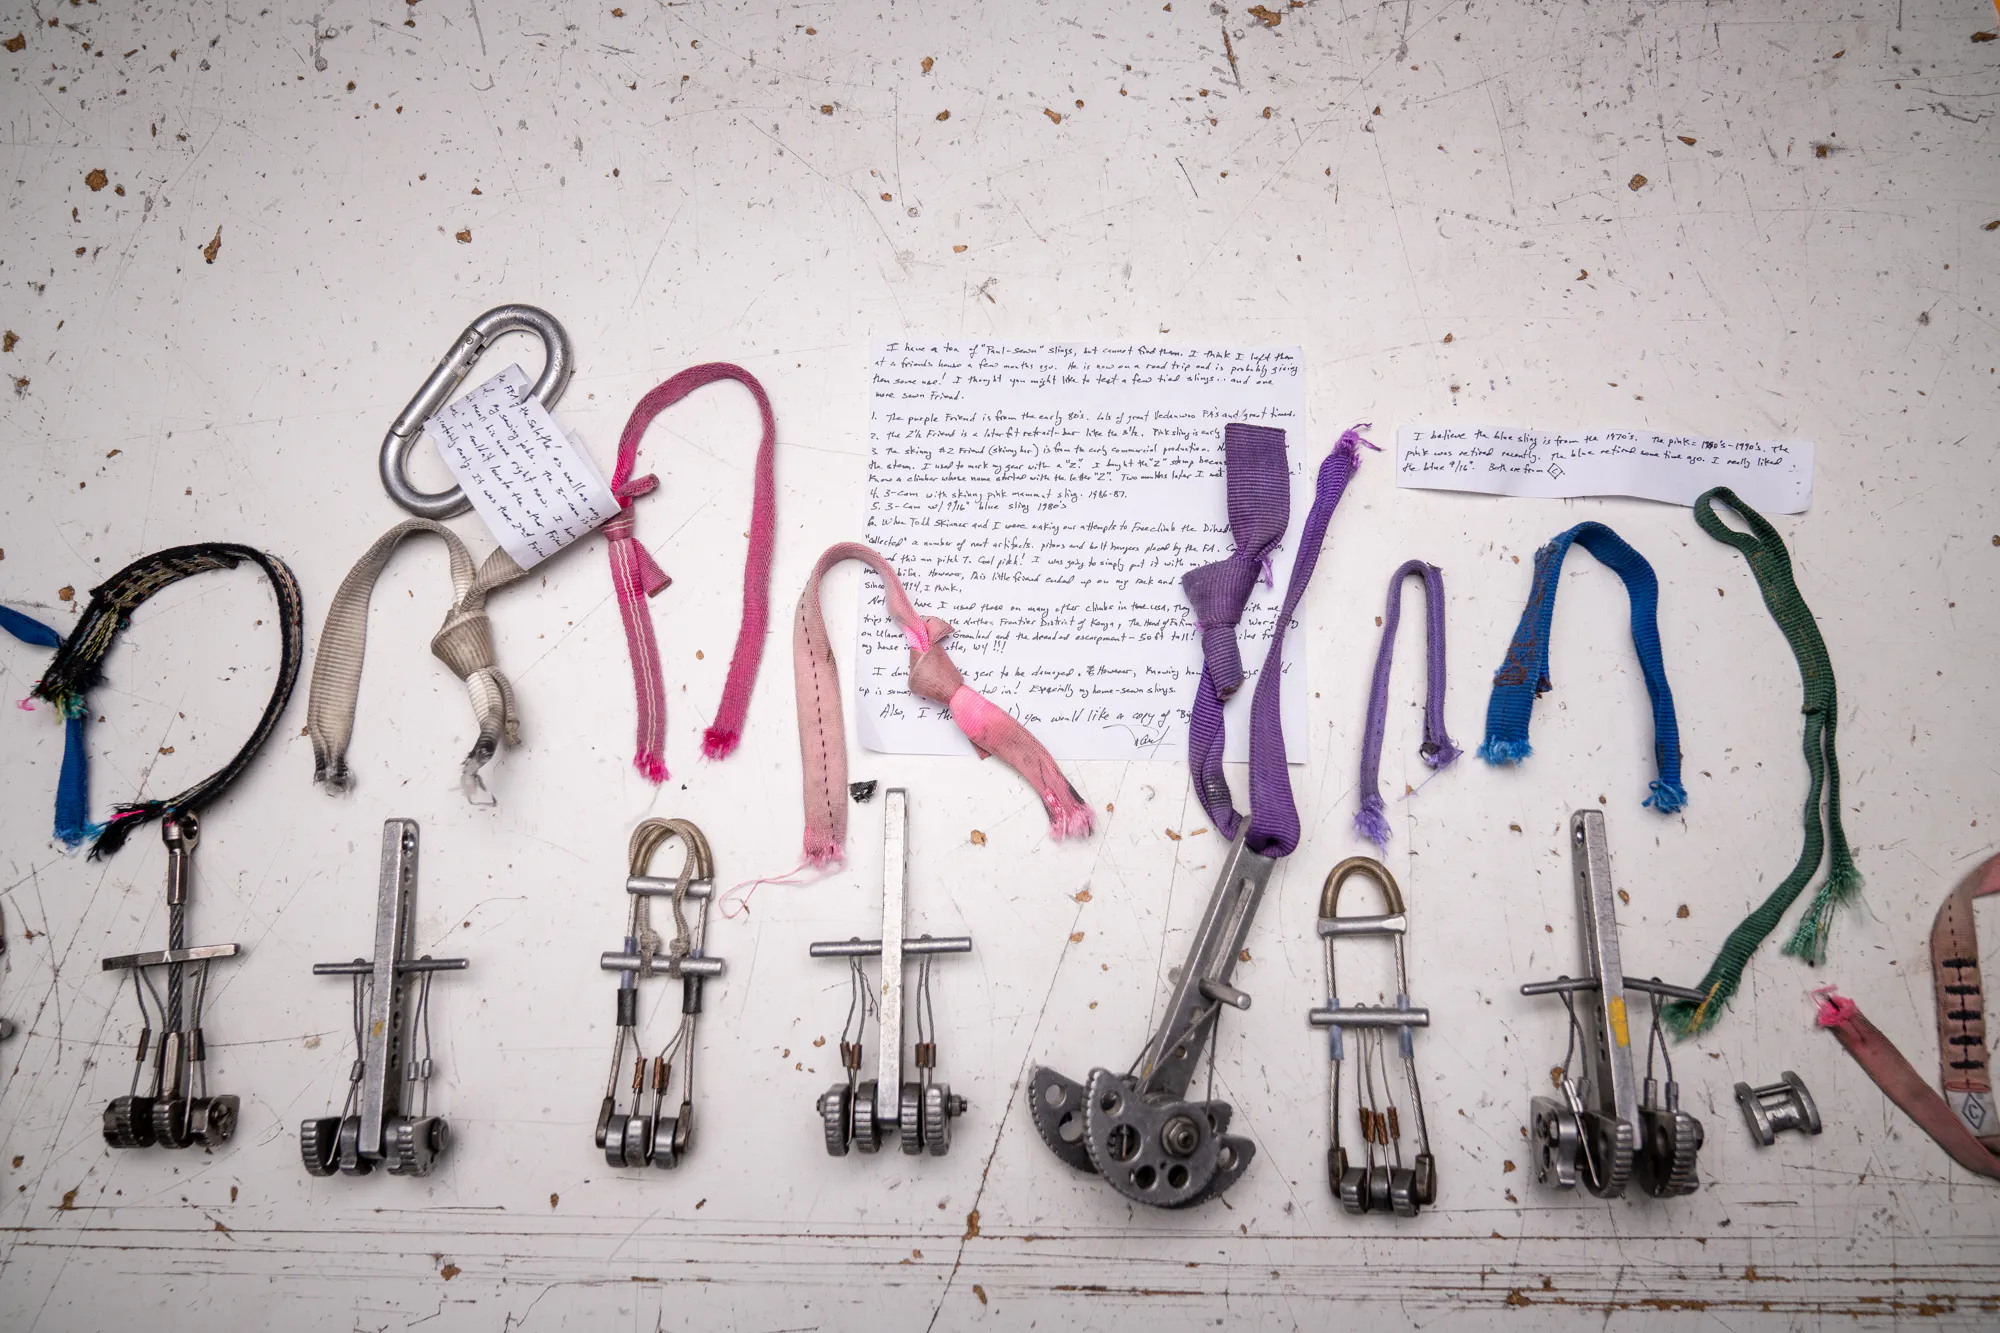 all the archival climbing gear lined up